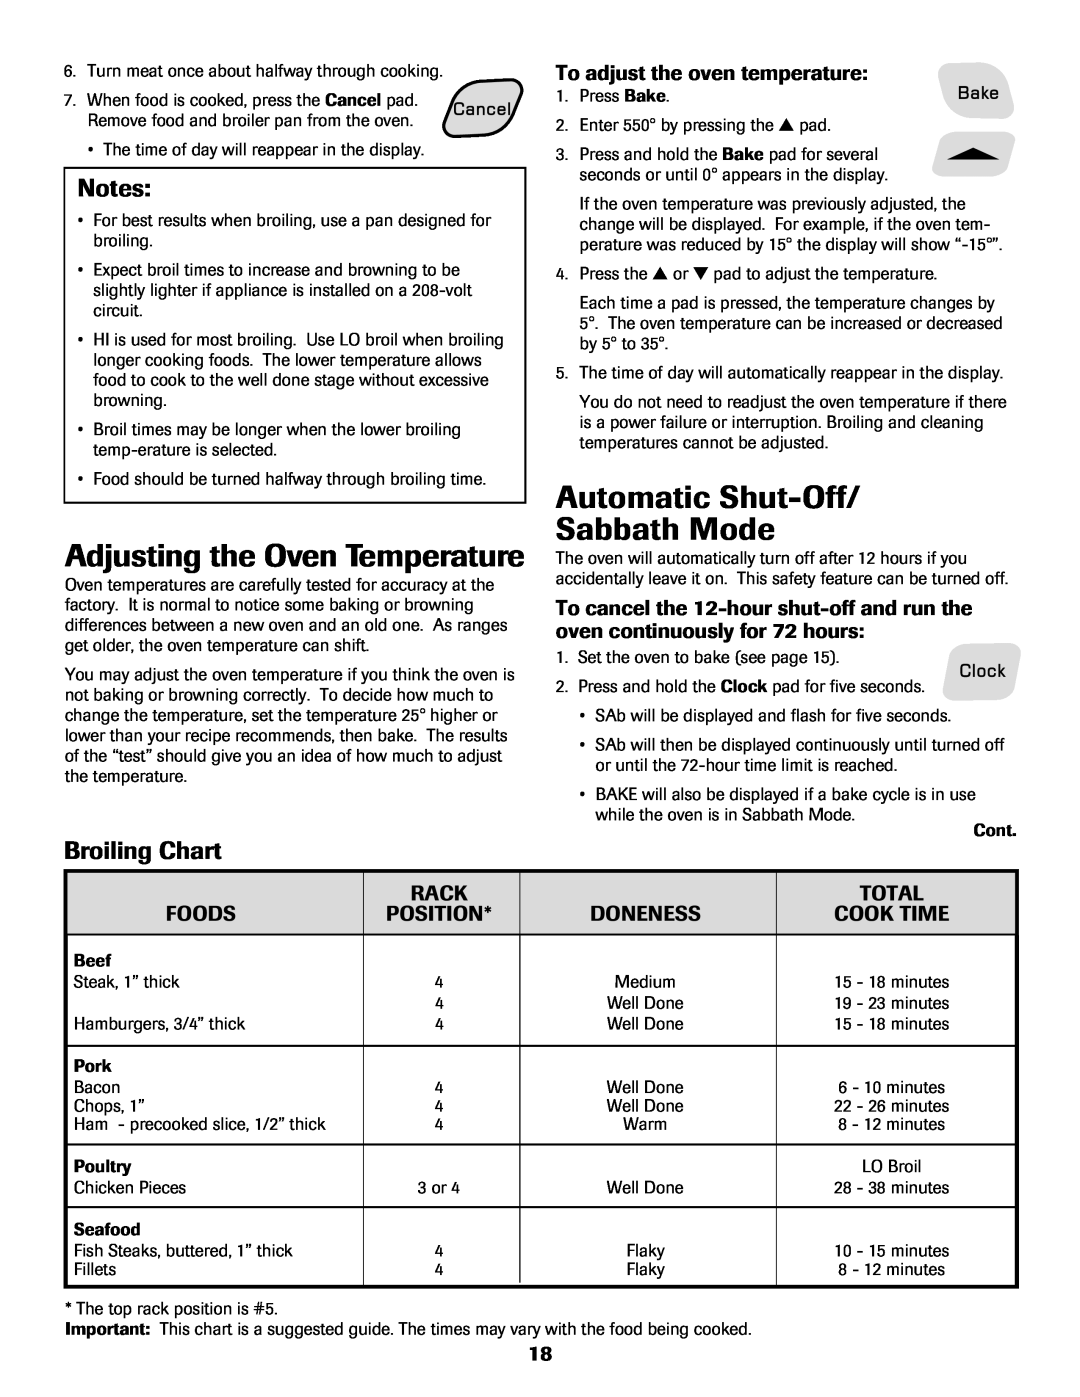 Amana AER5722CAS Adjusting the Oven Temperature, Automatic Shut-Off Sabbath Mode, Broiling Chart, Foods, Rack, Doneness 